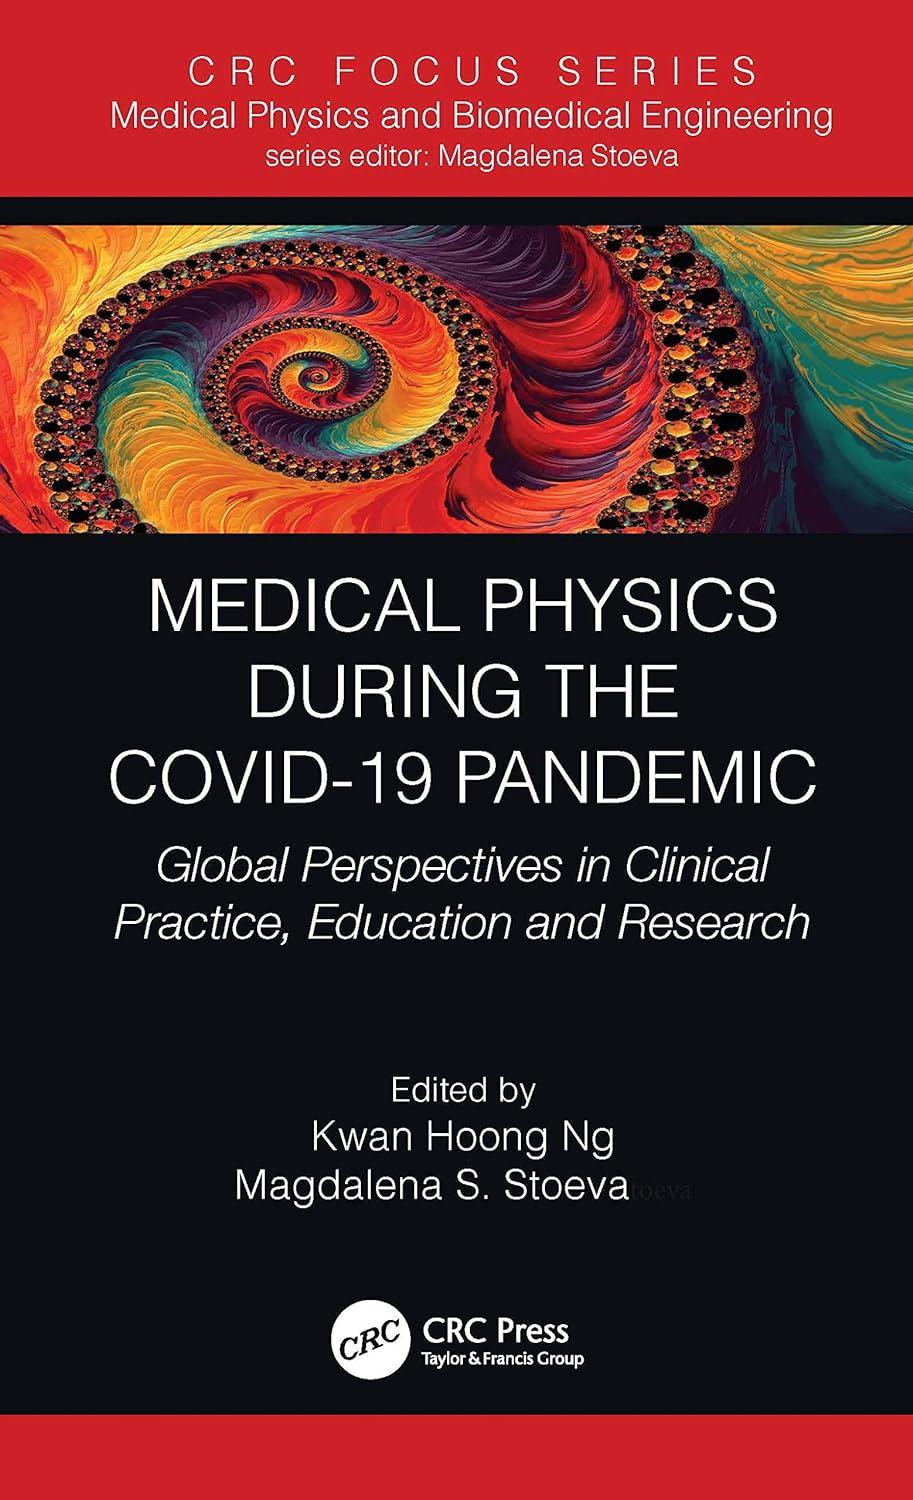 medical physics during the covid-19 pandemic global perspectives in clinical practice, education and research